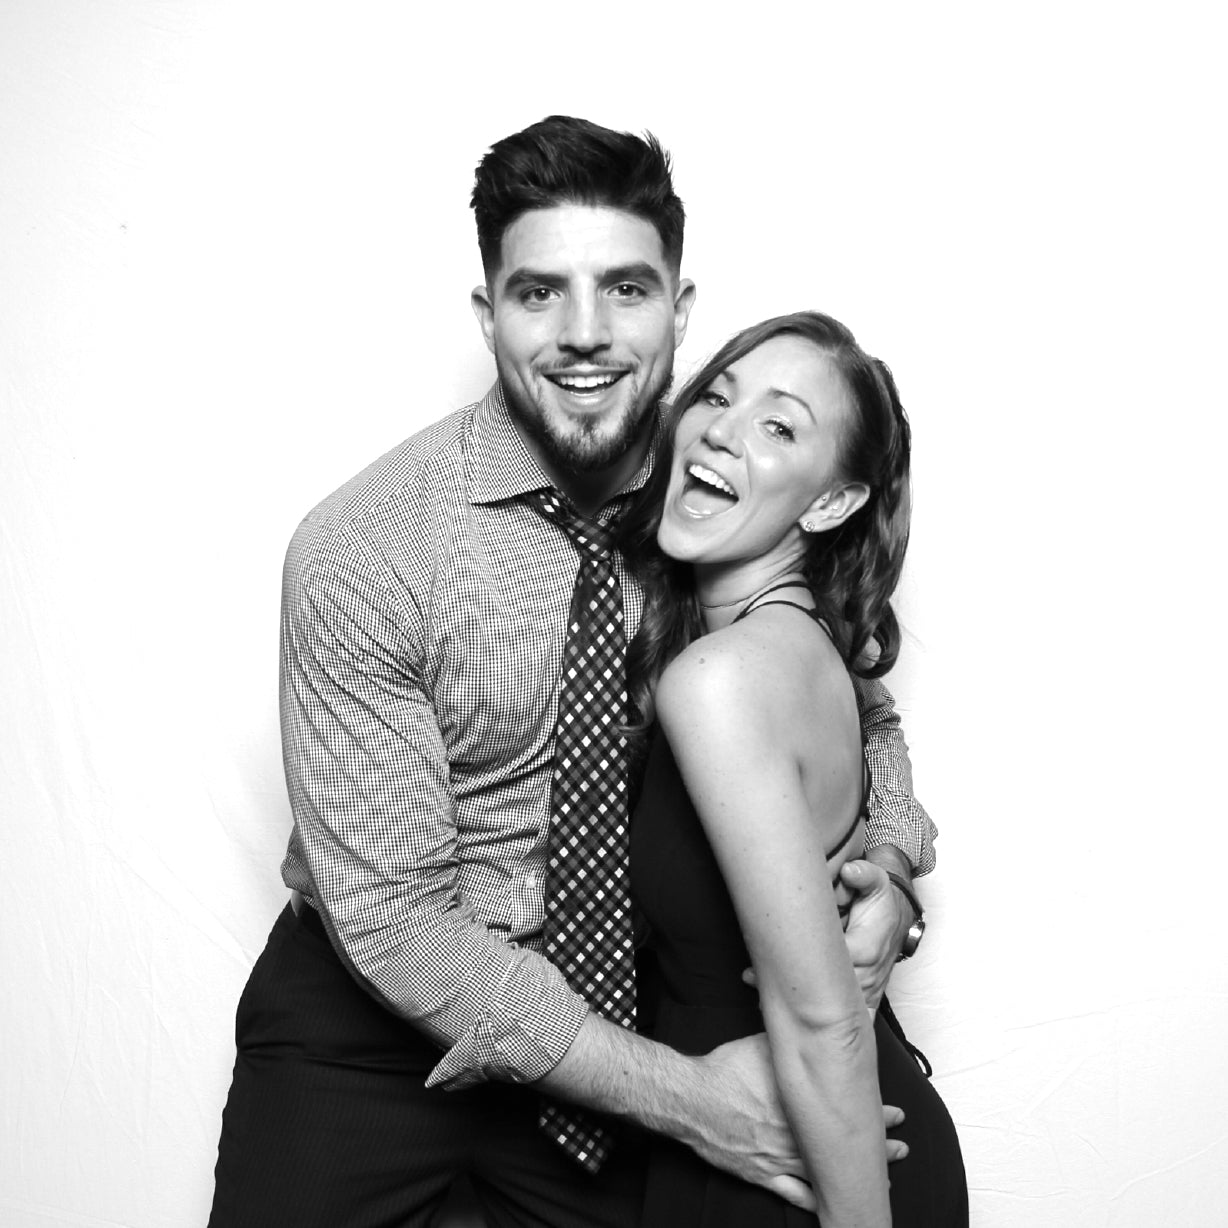 Black and White photo booth image from a Miami photo booth for rental